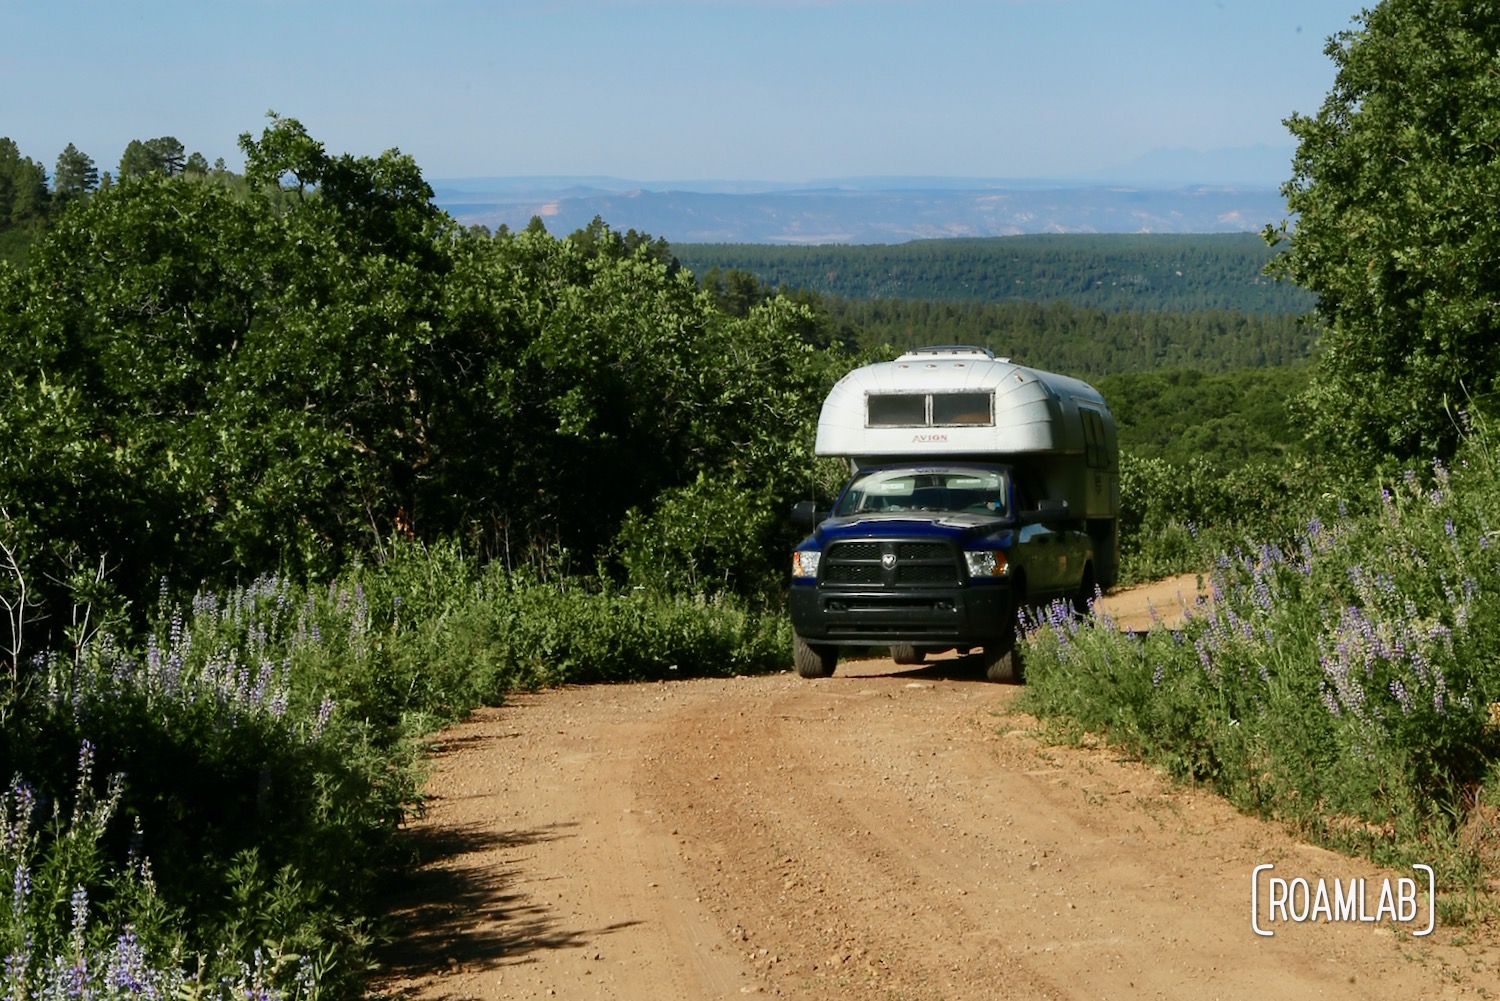 Vintage 1970 Avion C11 truck camper driving down a dirt road on the Rimrocker off-road and OHV trail.